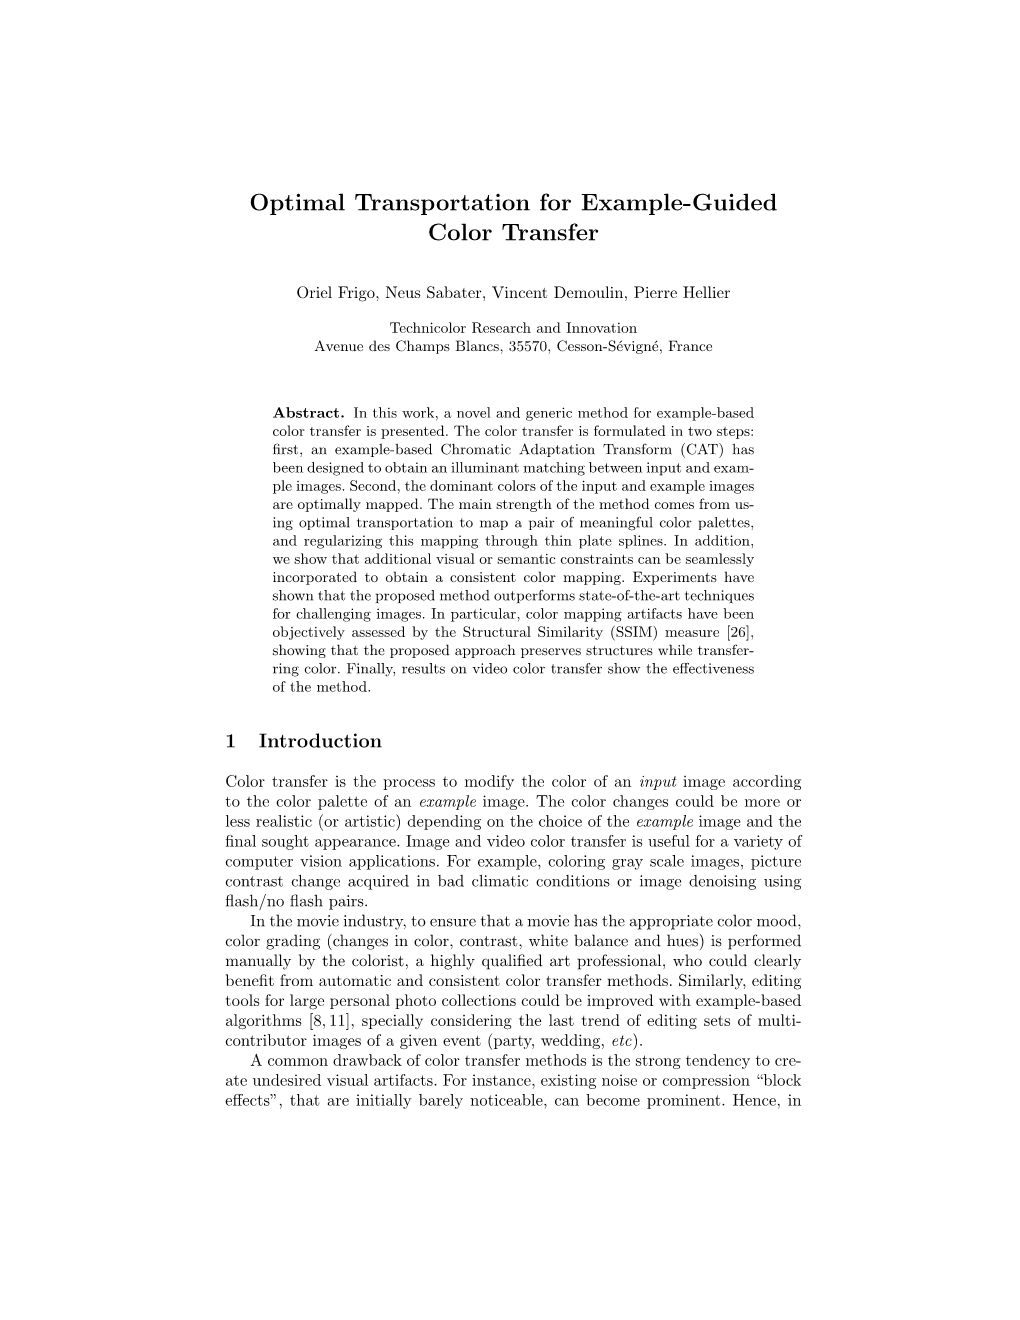 Optimal Transportation for Example-Guided Color Transfer